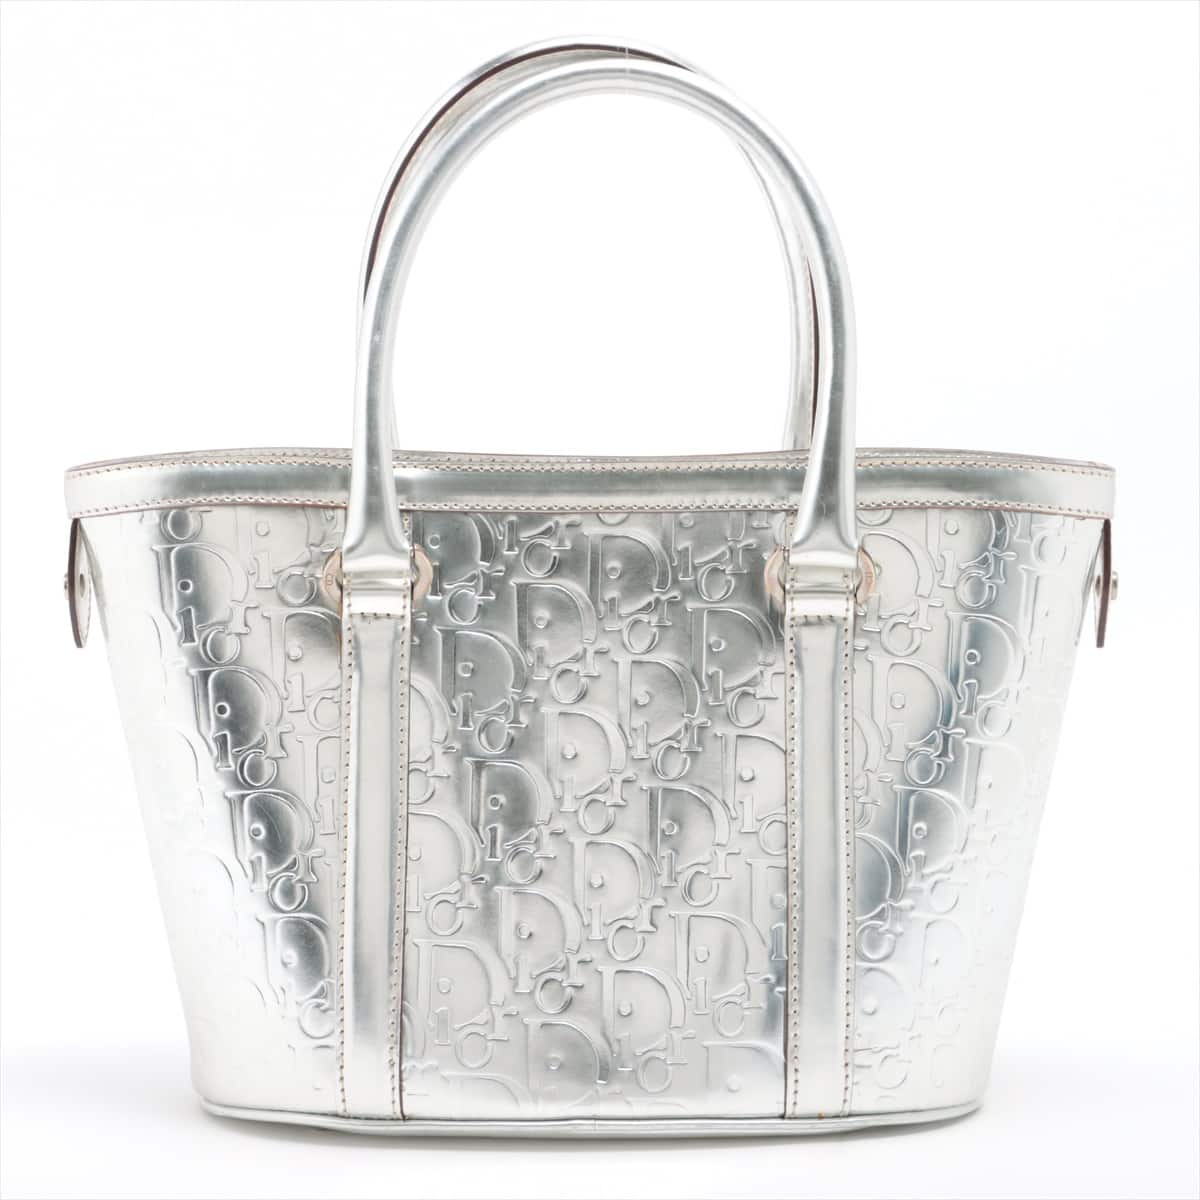 Christian Dior Trotter Patent leather Tote bag Silver